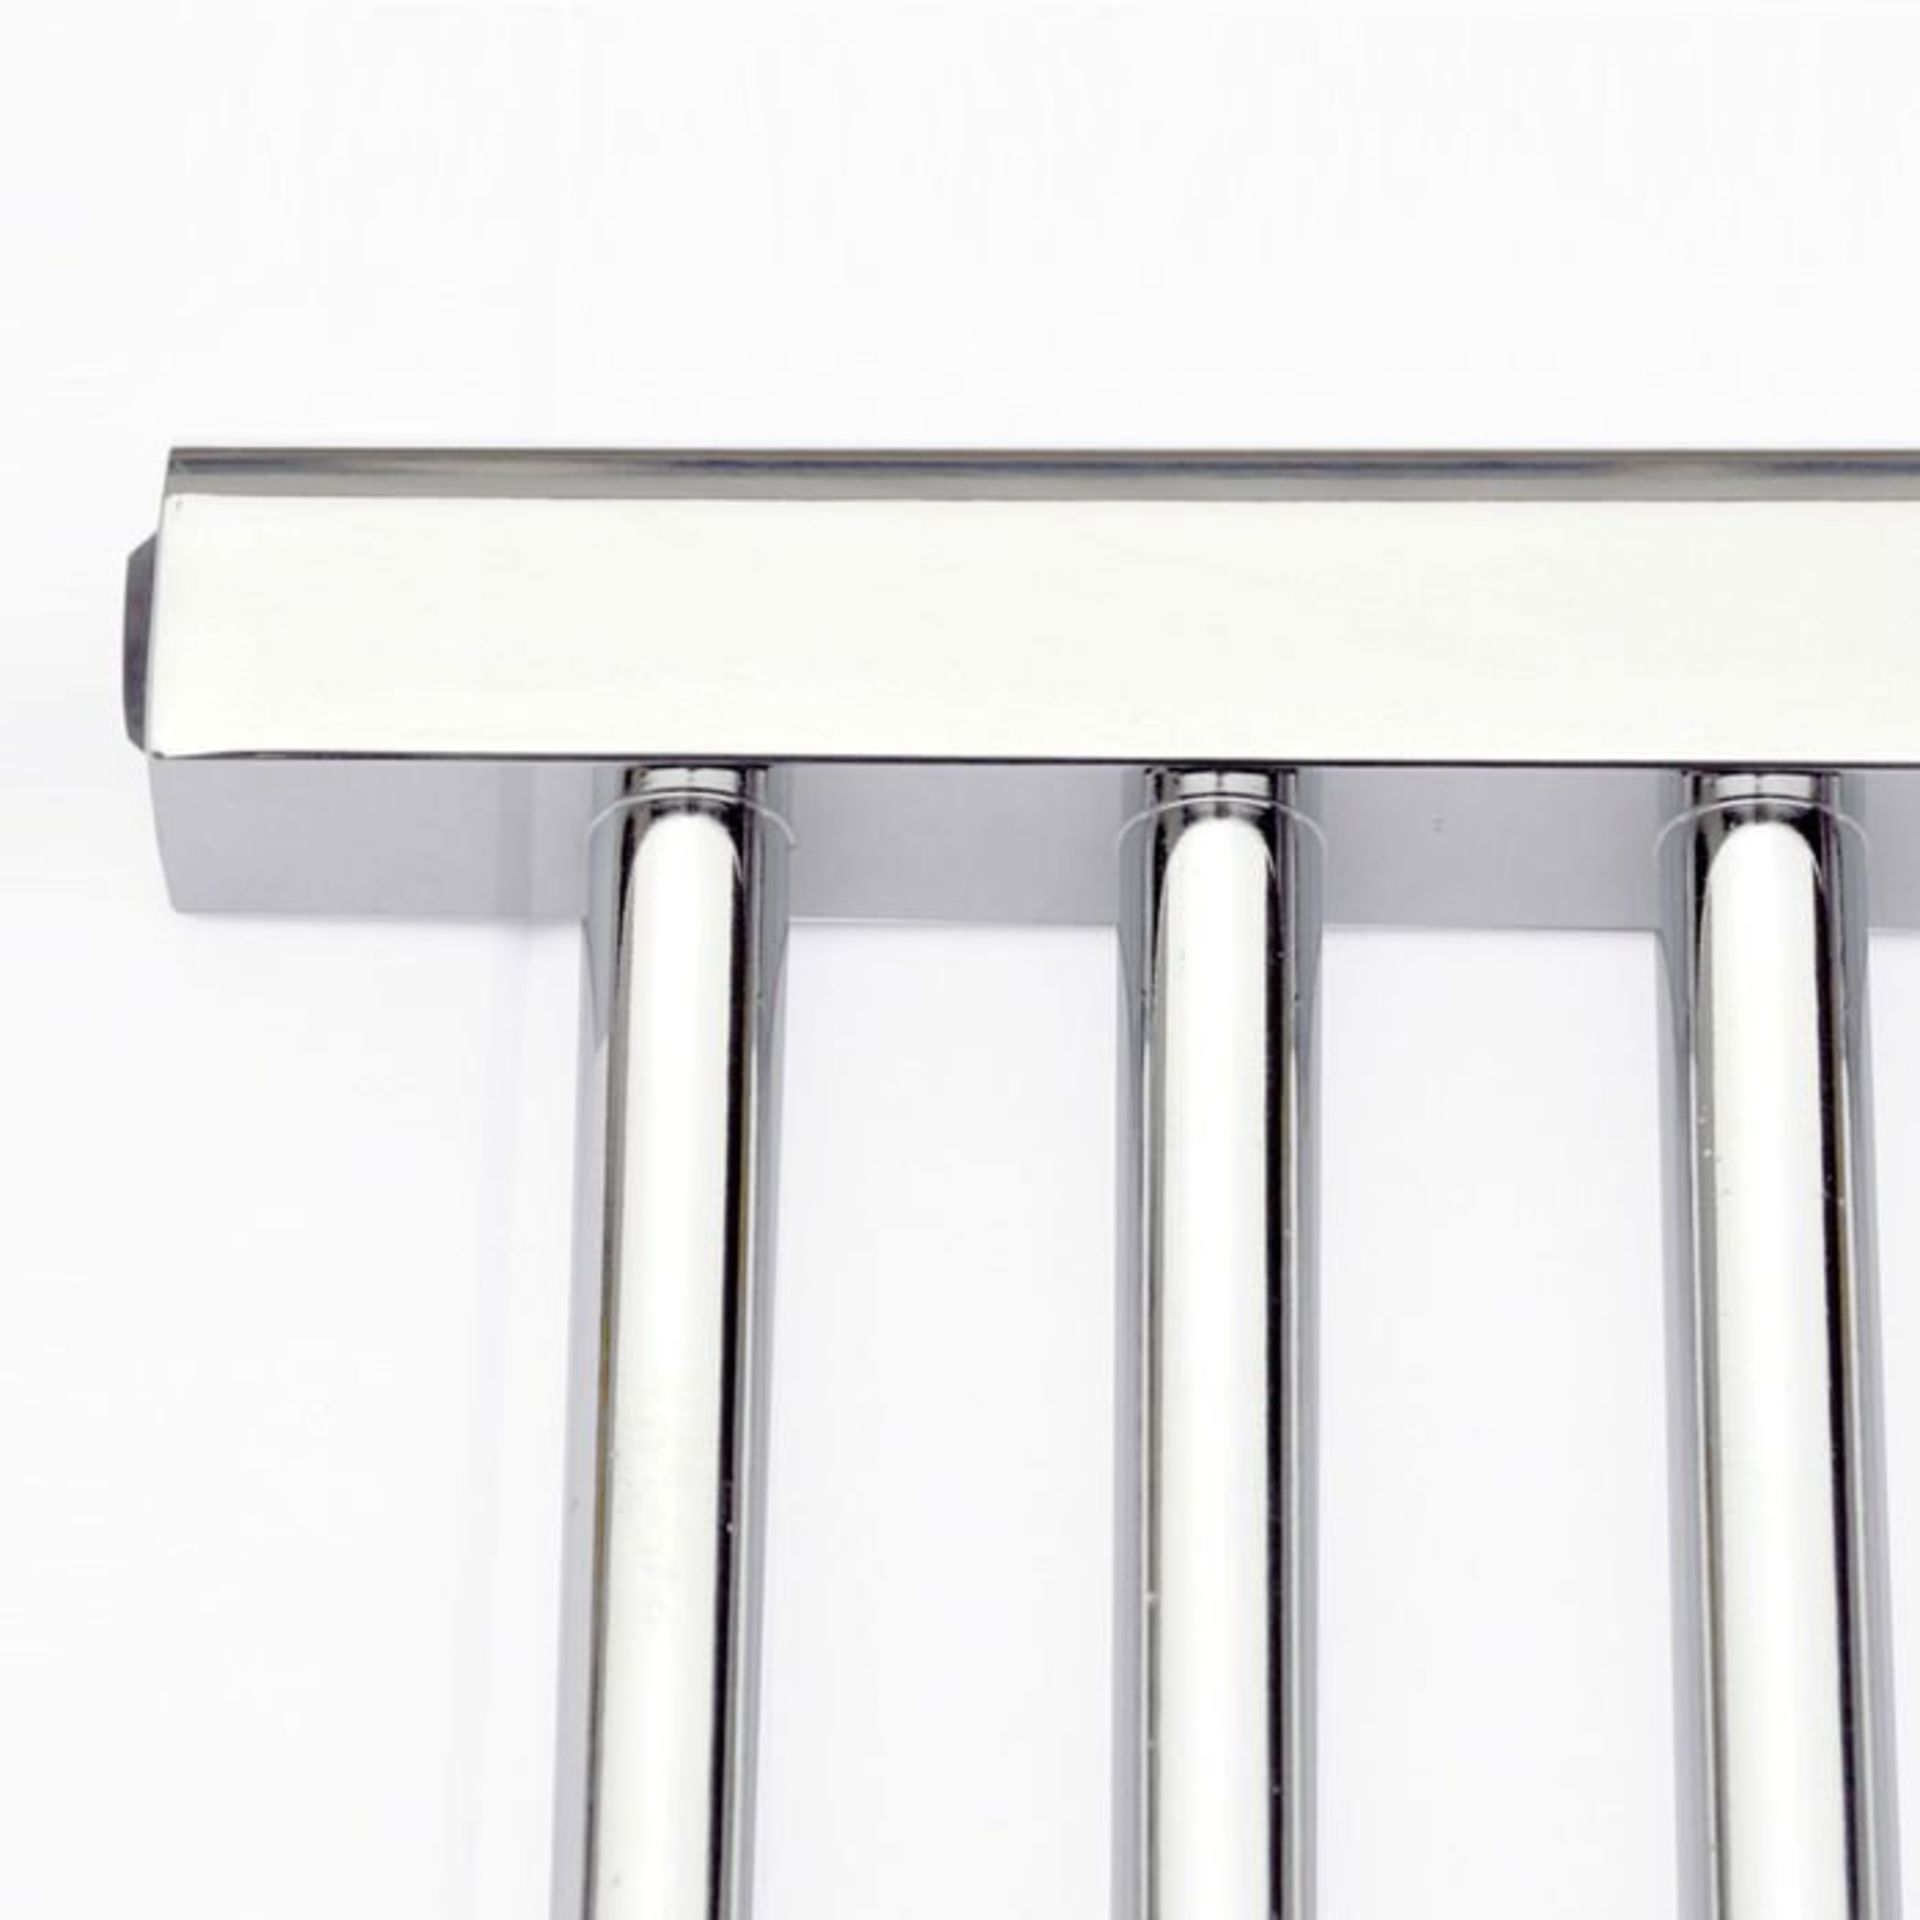 (G103) 1200x500mm - 20mm Tubes - Chrome Heated Straight Rail Ladder Towel Radiator. Low carbon steel - Image 2 of 3